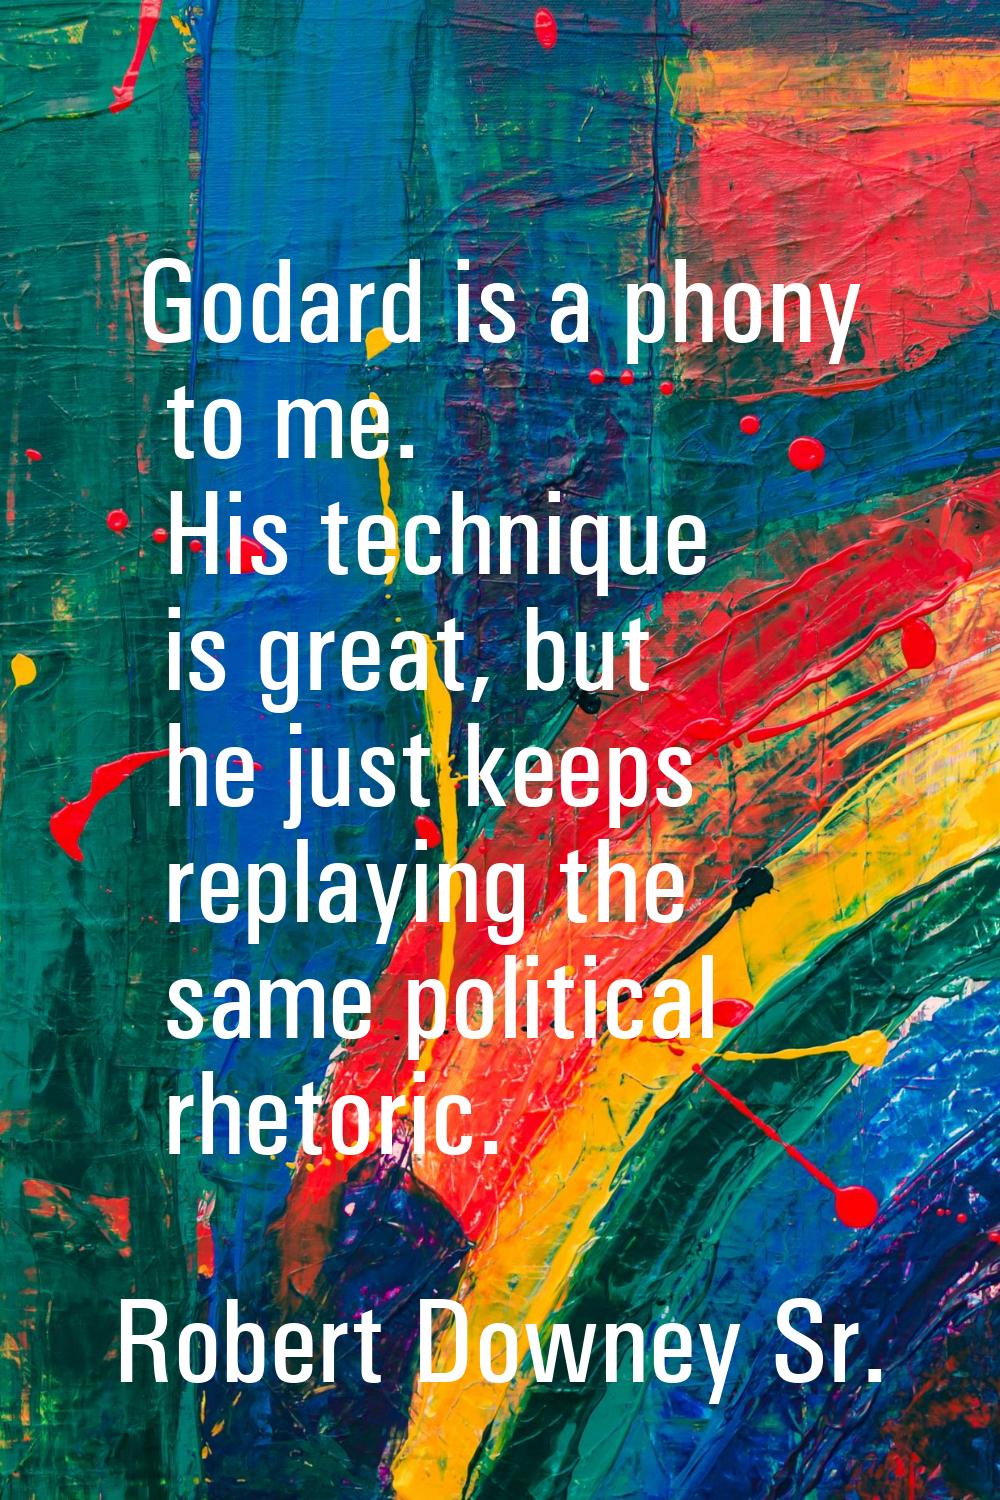 Godard is a phony to me. His technique is great, but he just keeps replaying the same political rhe